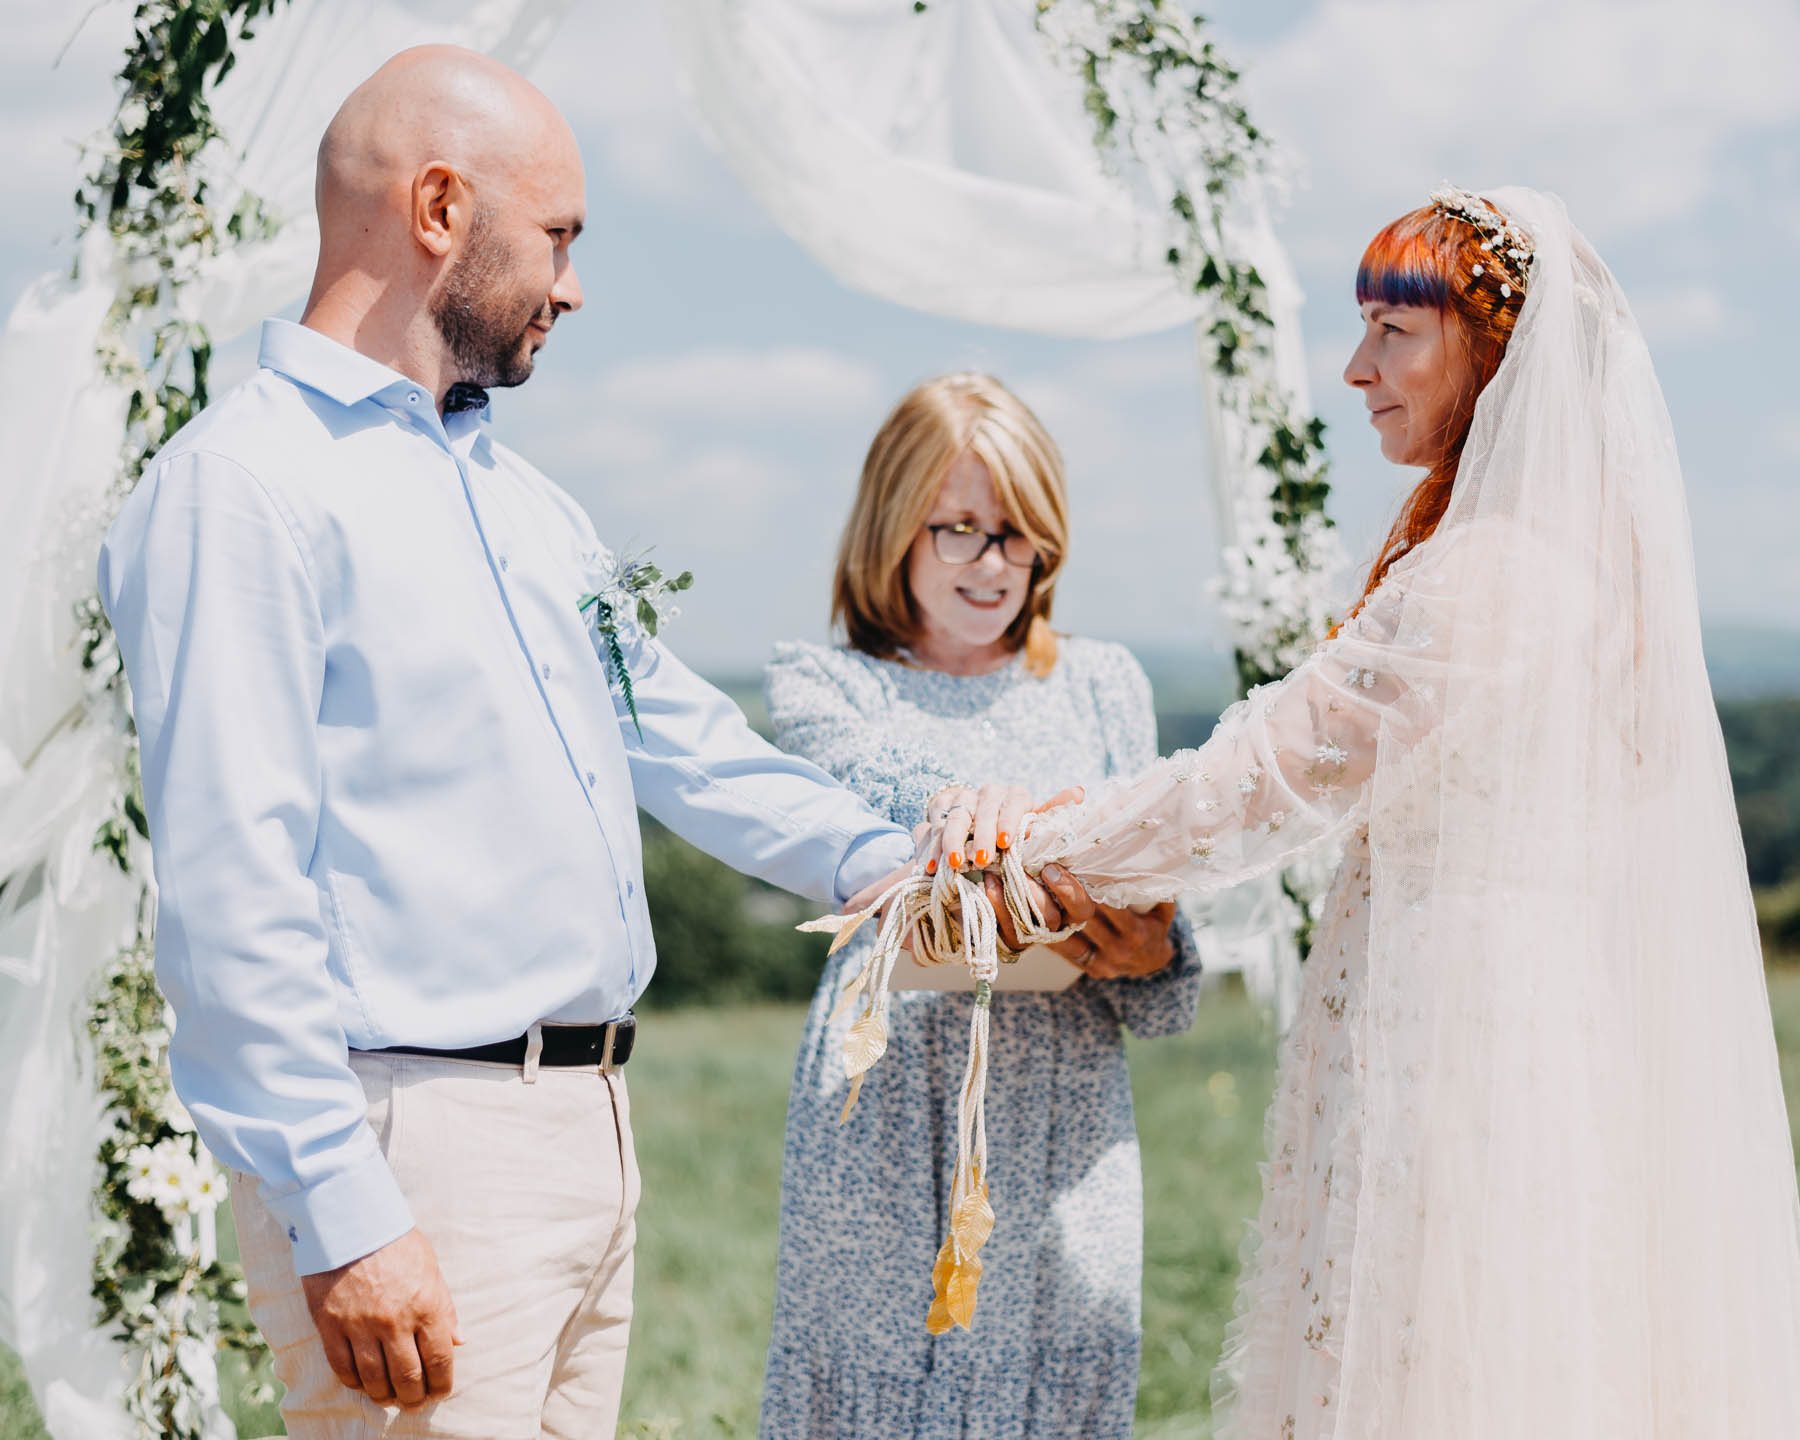 Bride and groom having a handfasting ceremony